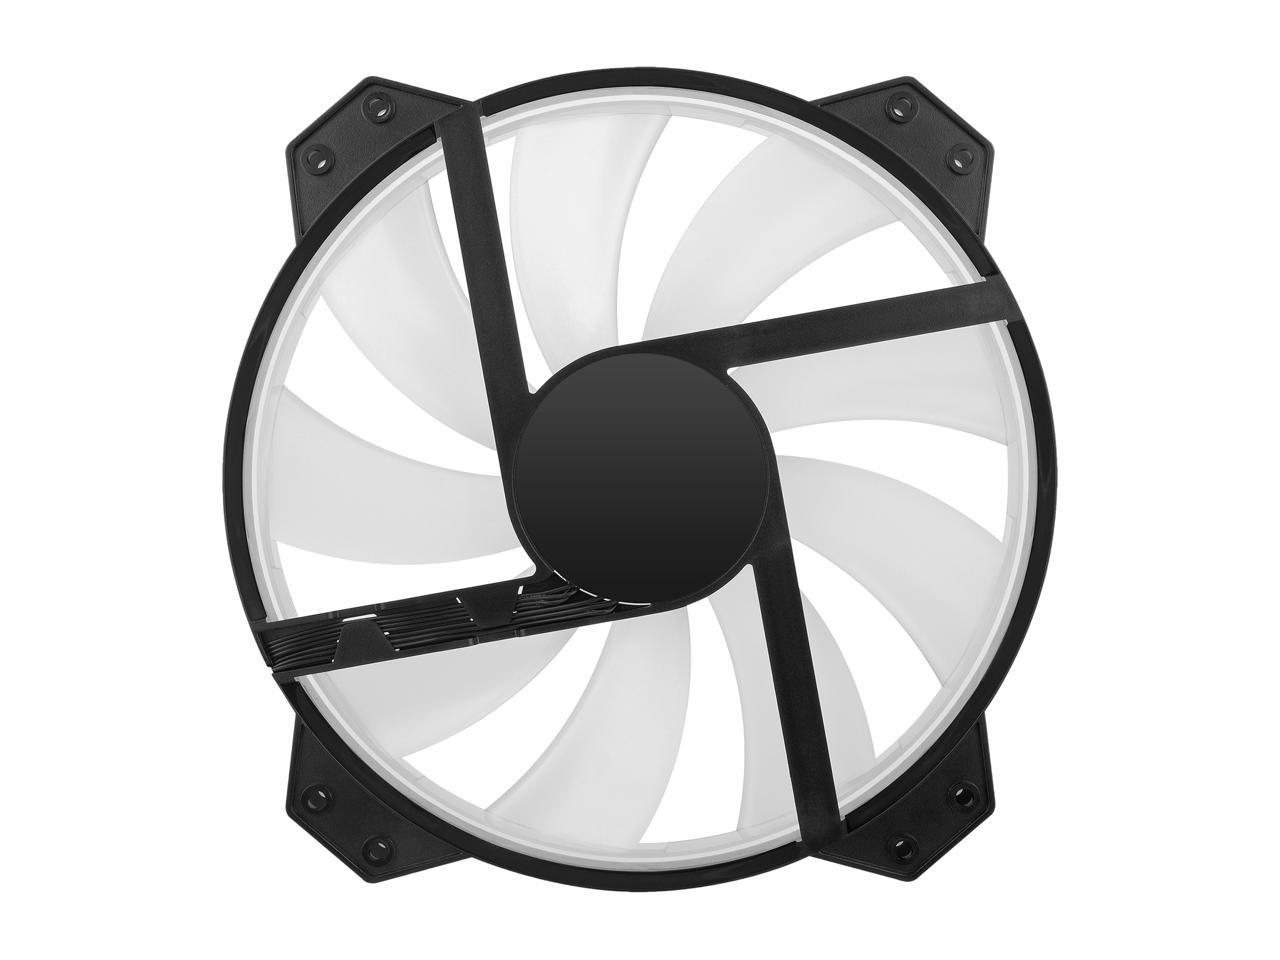 Masterfan Mf200R Rgb - Premium-Quality 200Mm Rgb Hybrid Silent High Airflow In-Take Fan For Computer Case.By Cooler Master